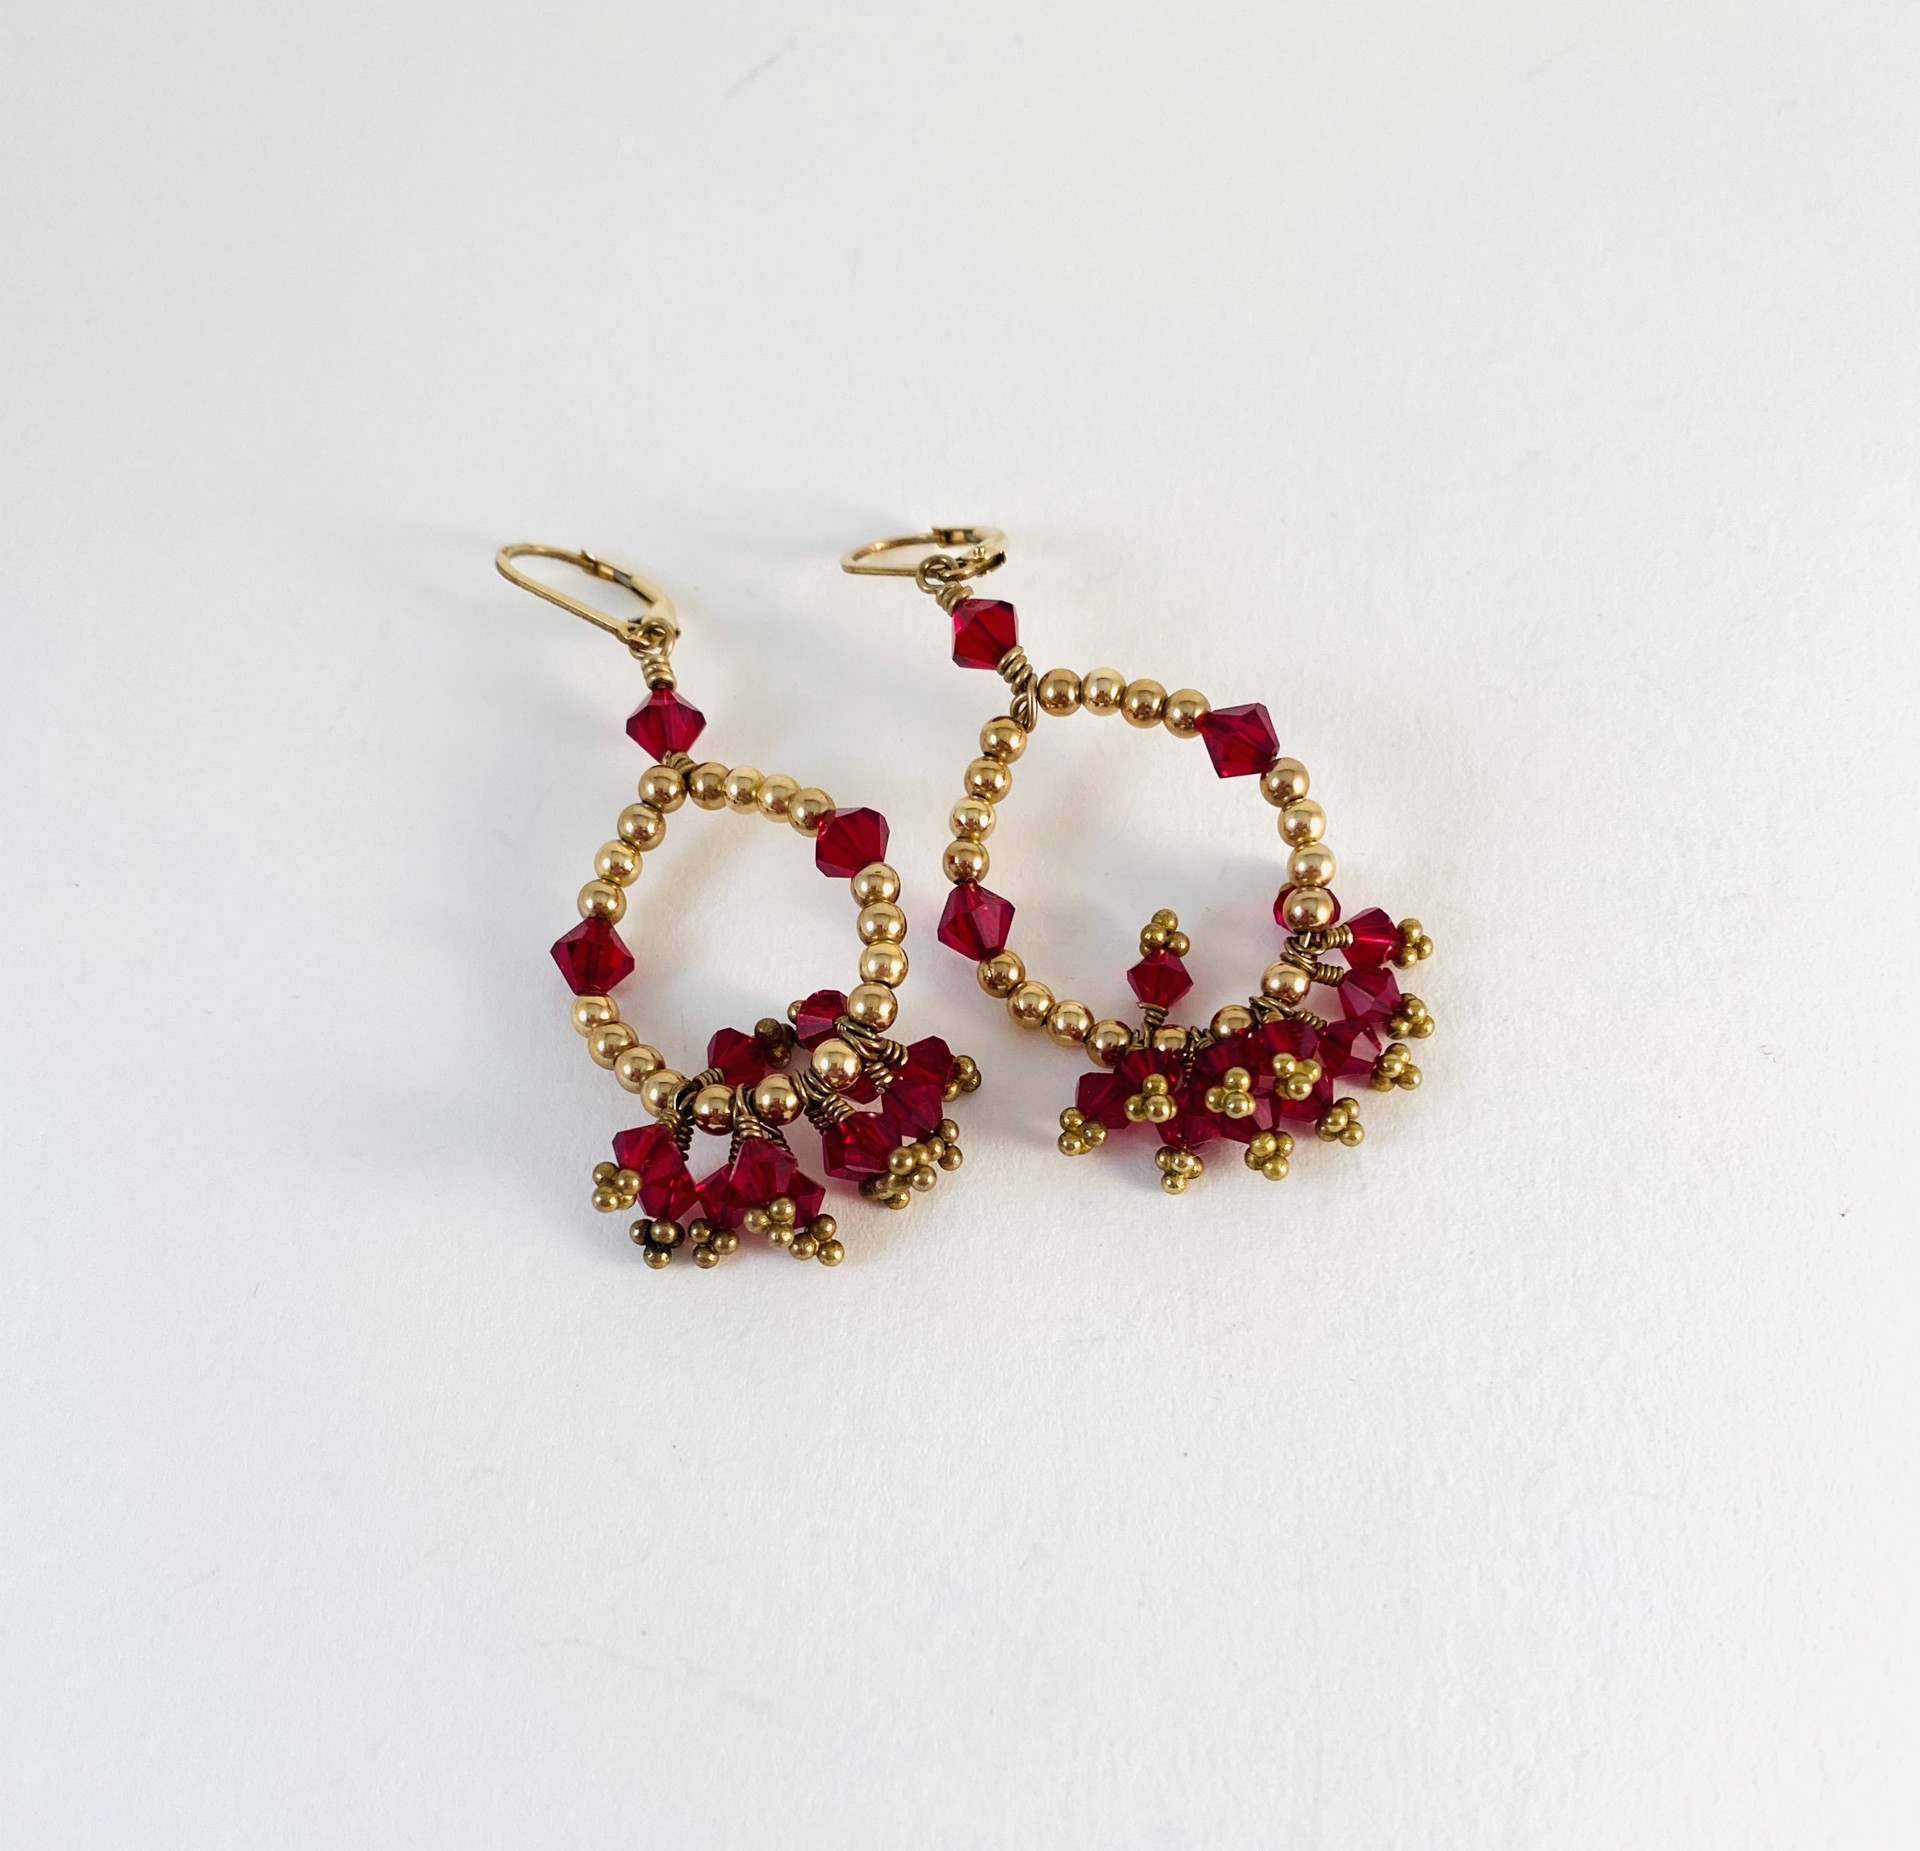 Swarovski Crystal and Gold Bead Earrings by Shoshannah Weinisch